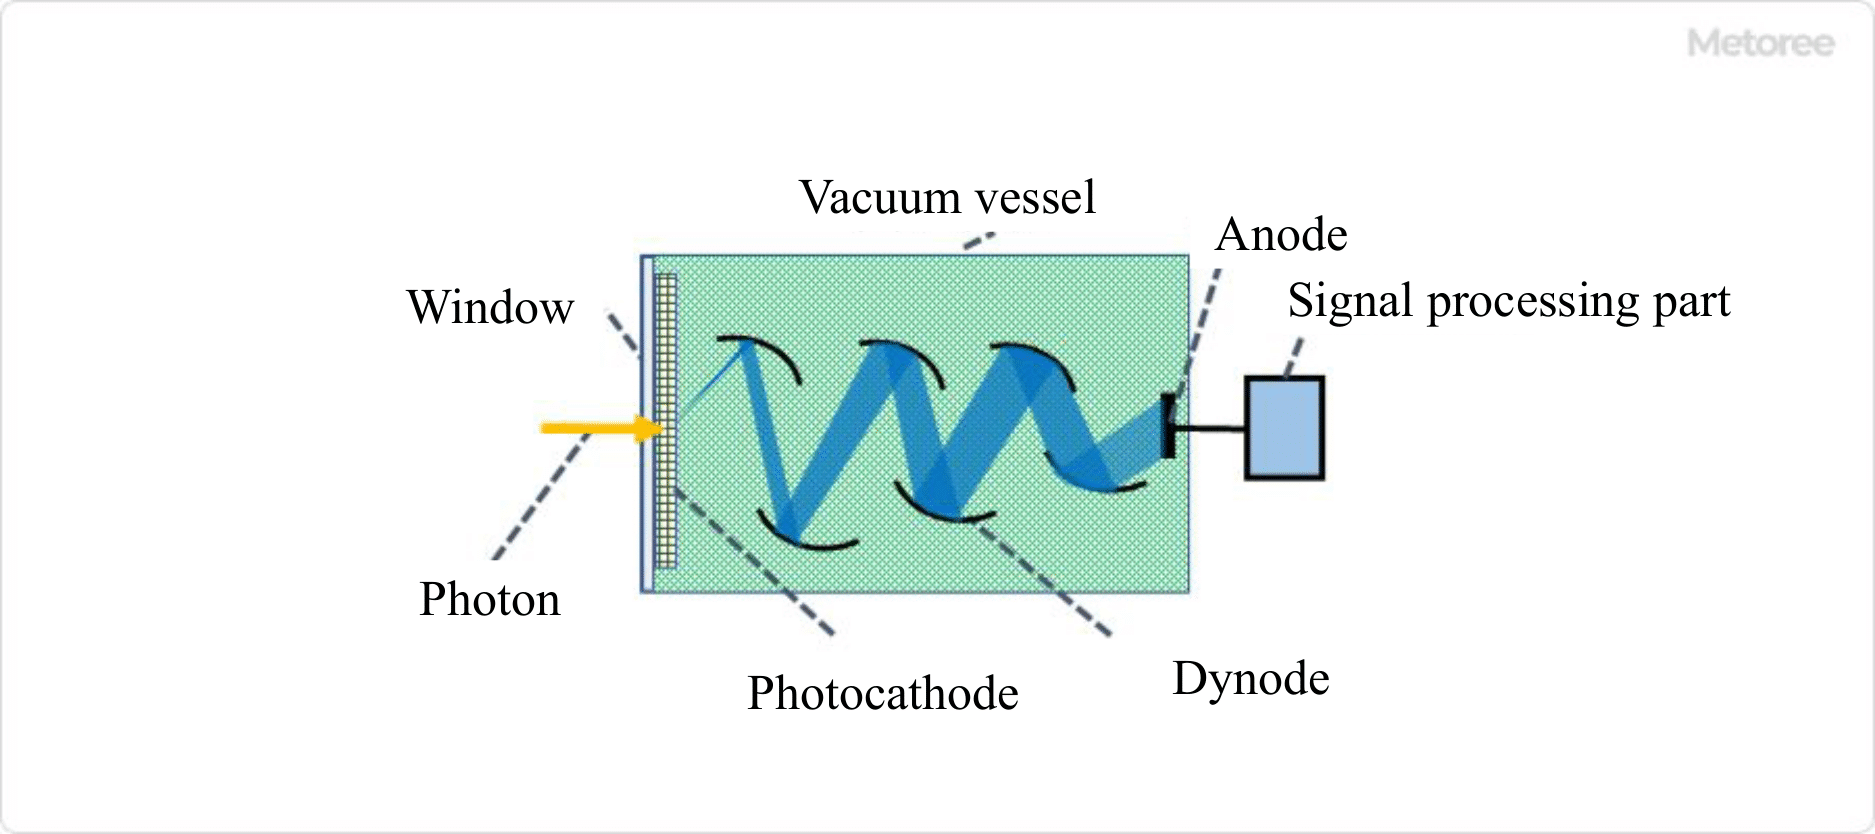 Figure 1. Basic structure of photomultiplier tubes